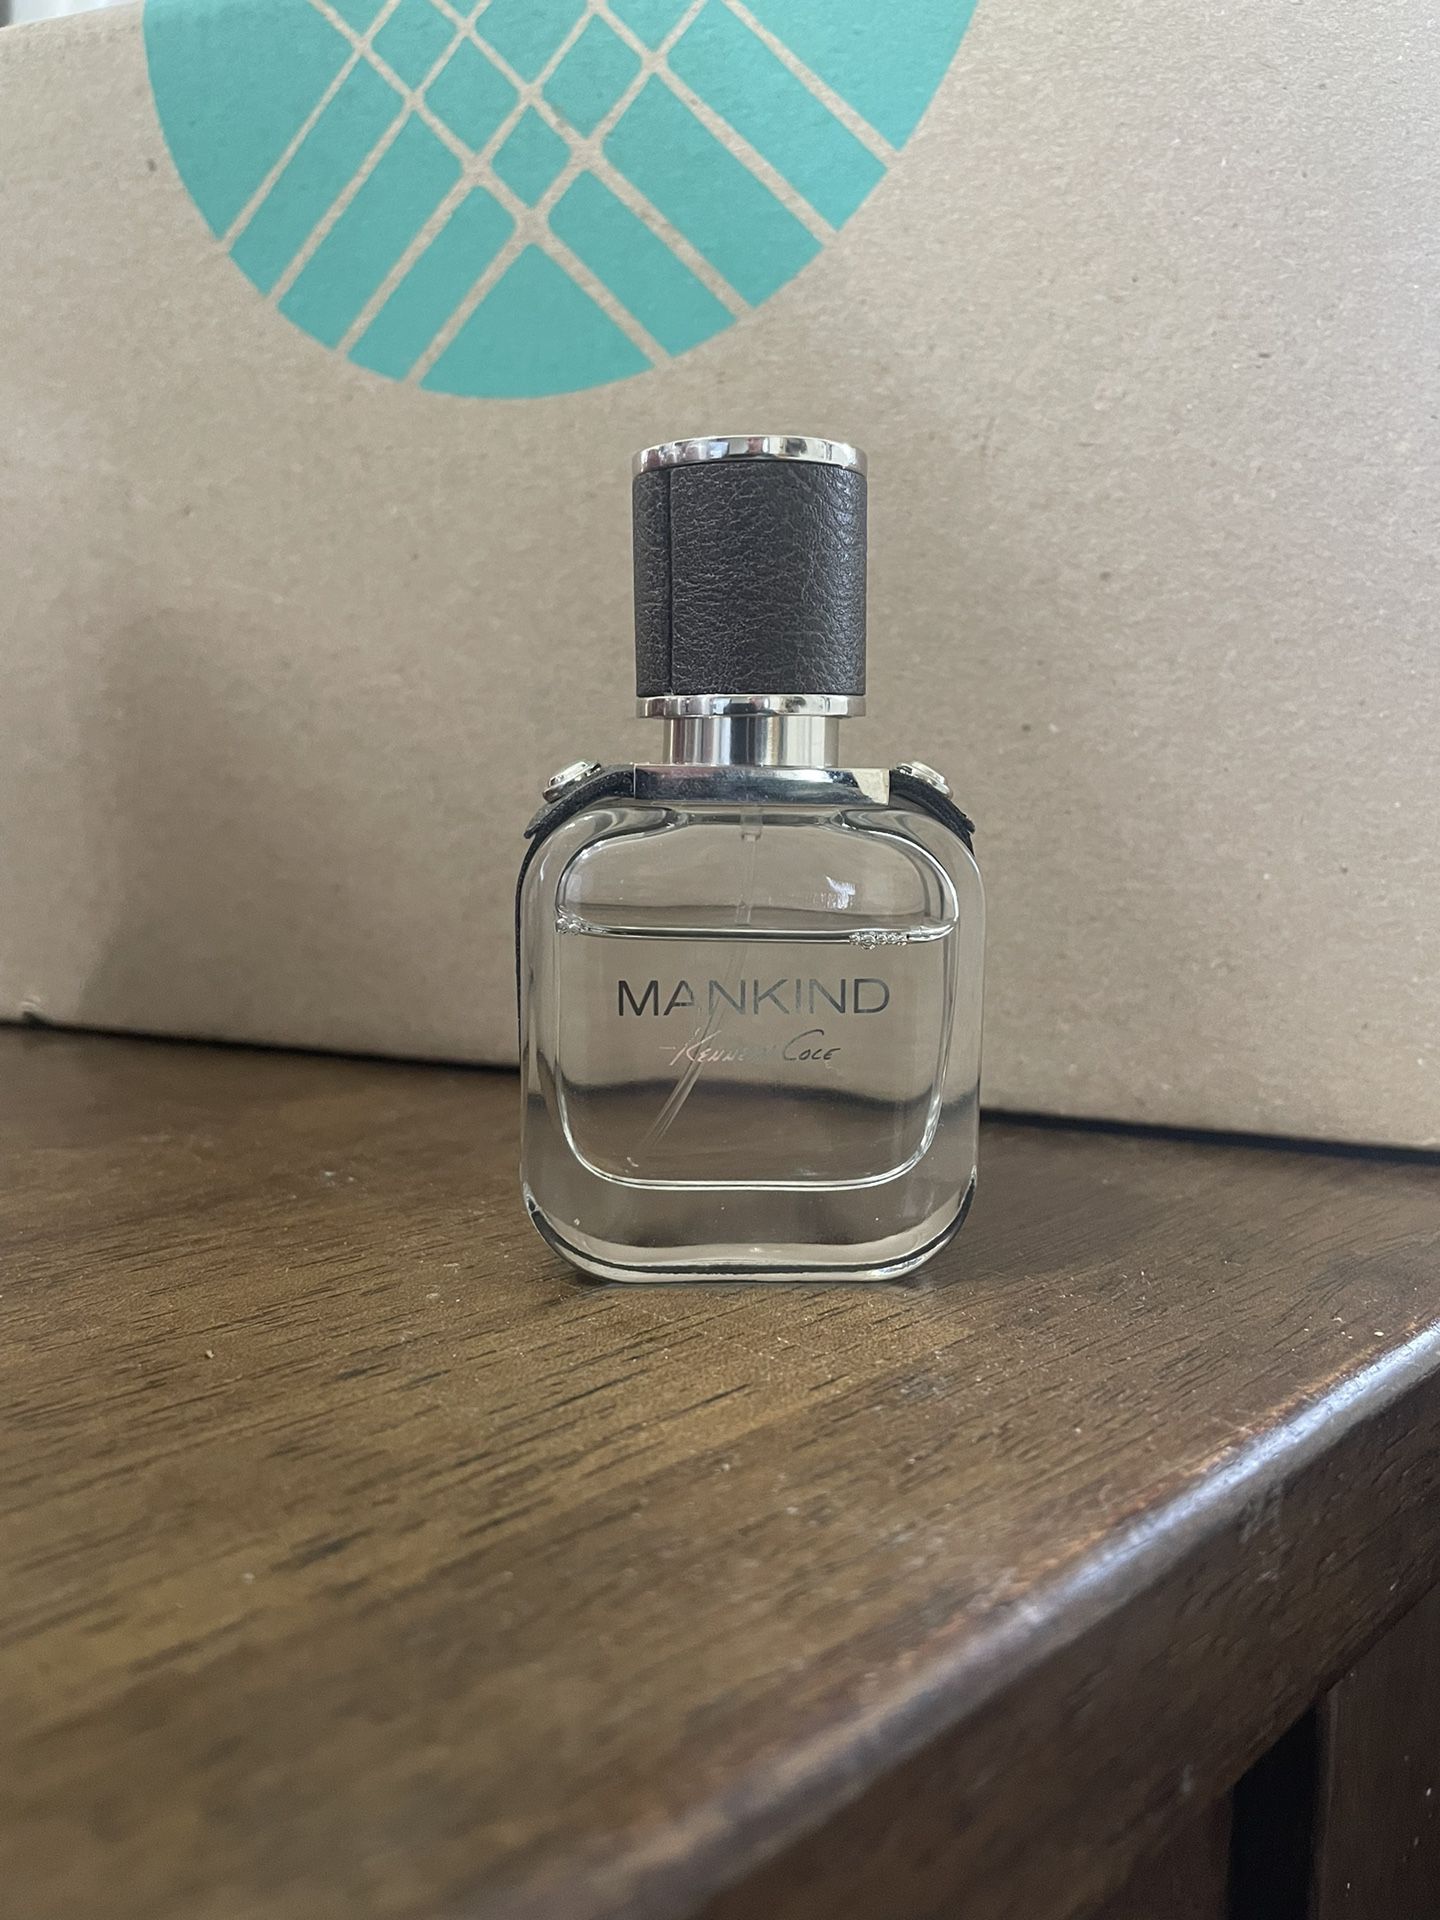 Kenneth Cole Mankind Cologne